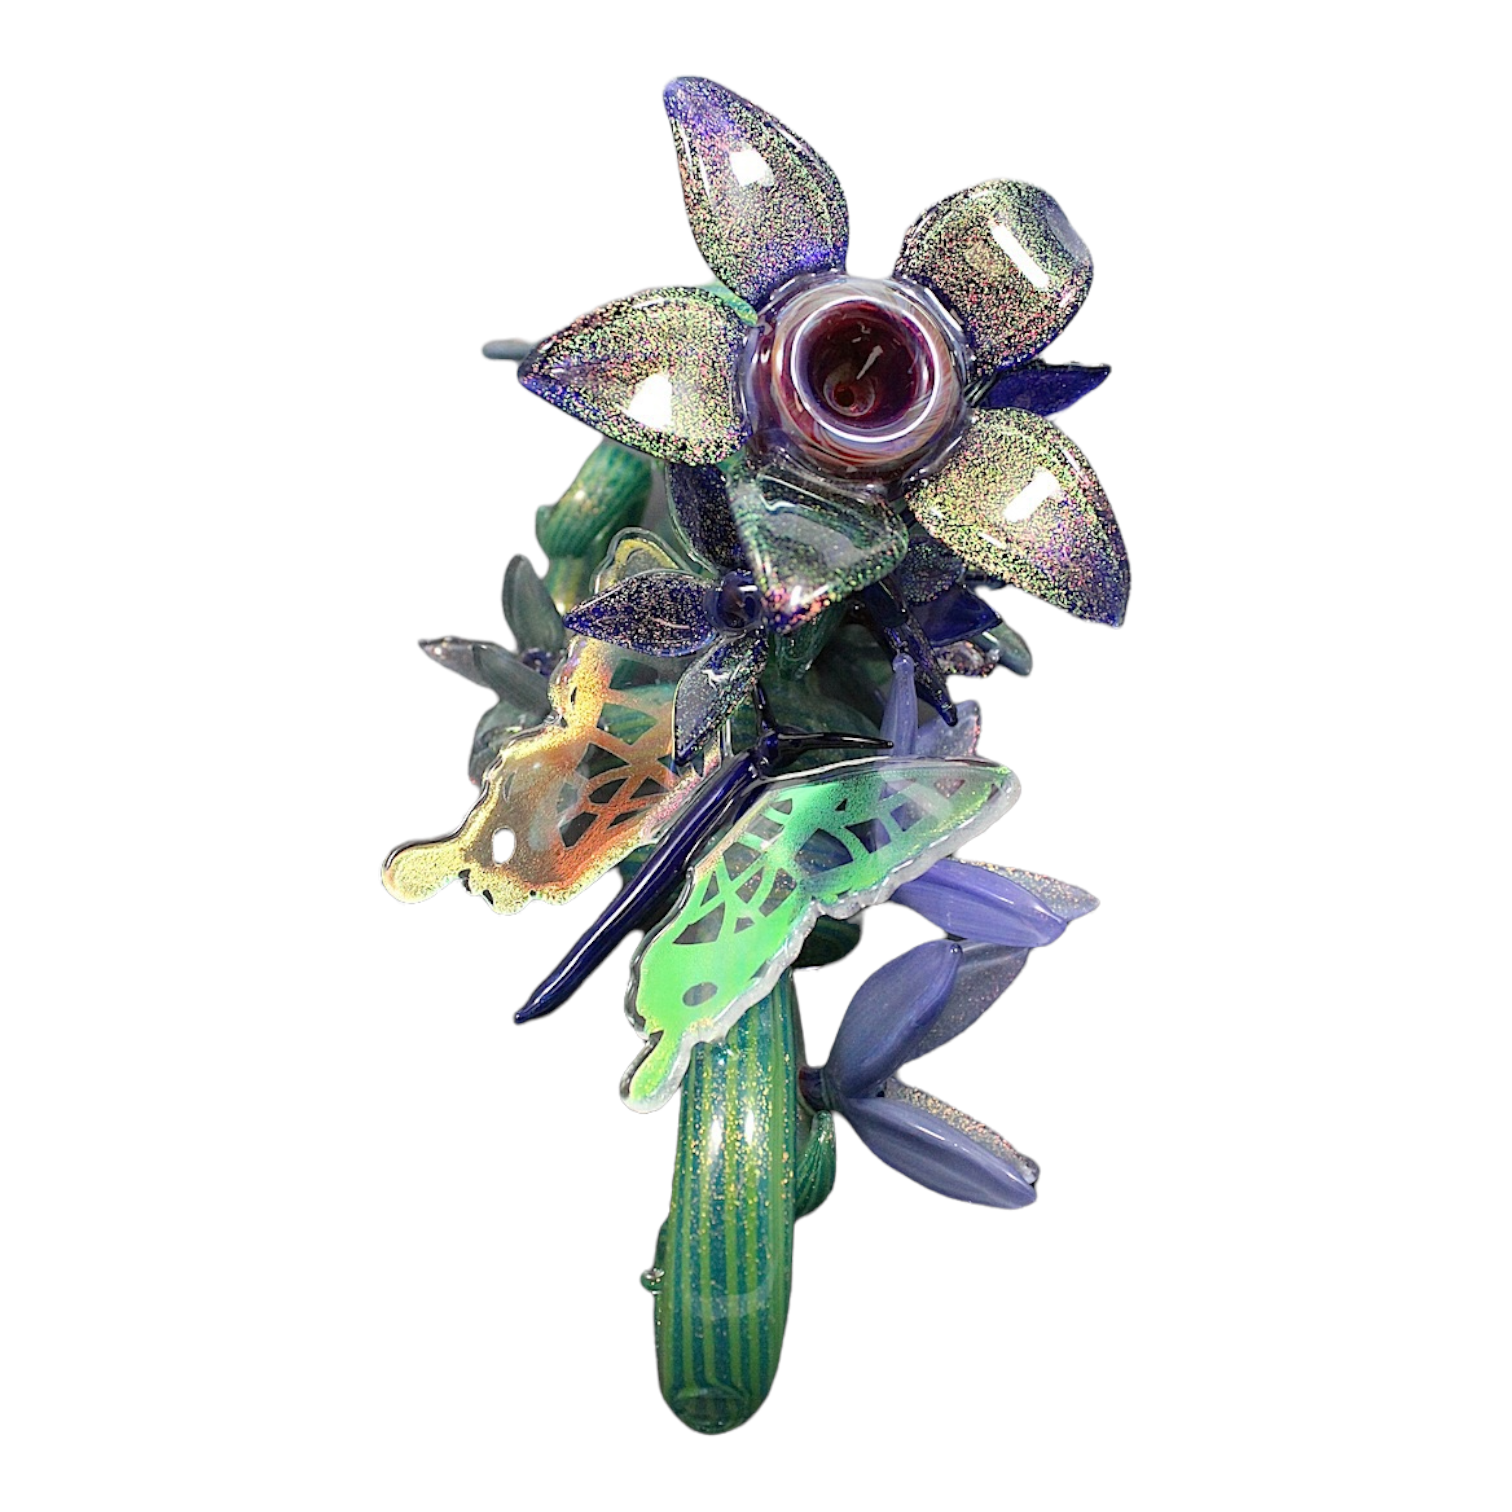 Darby Holm - The Death Flower- Cactus Dichro Butterfly Push Bubbler